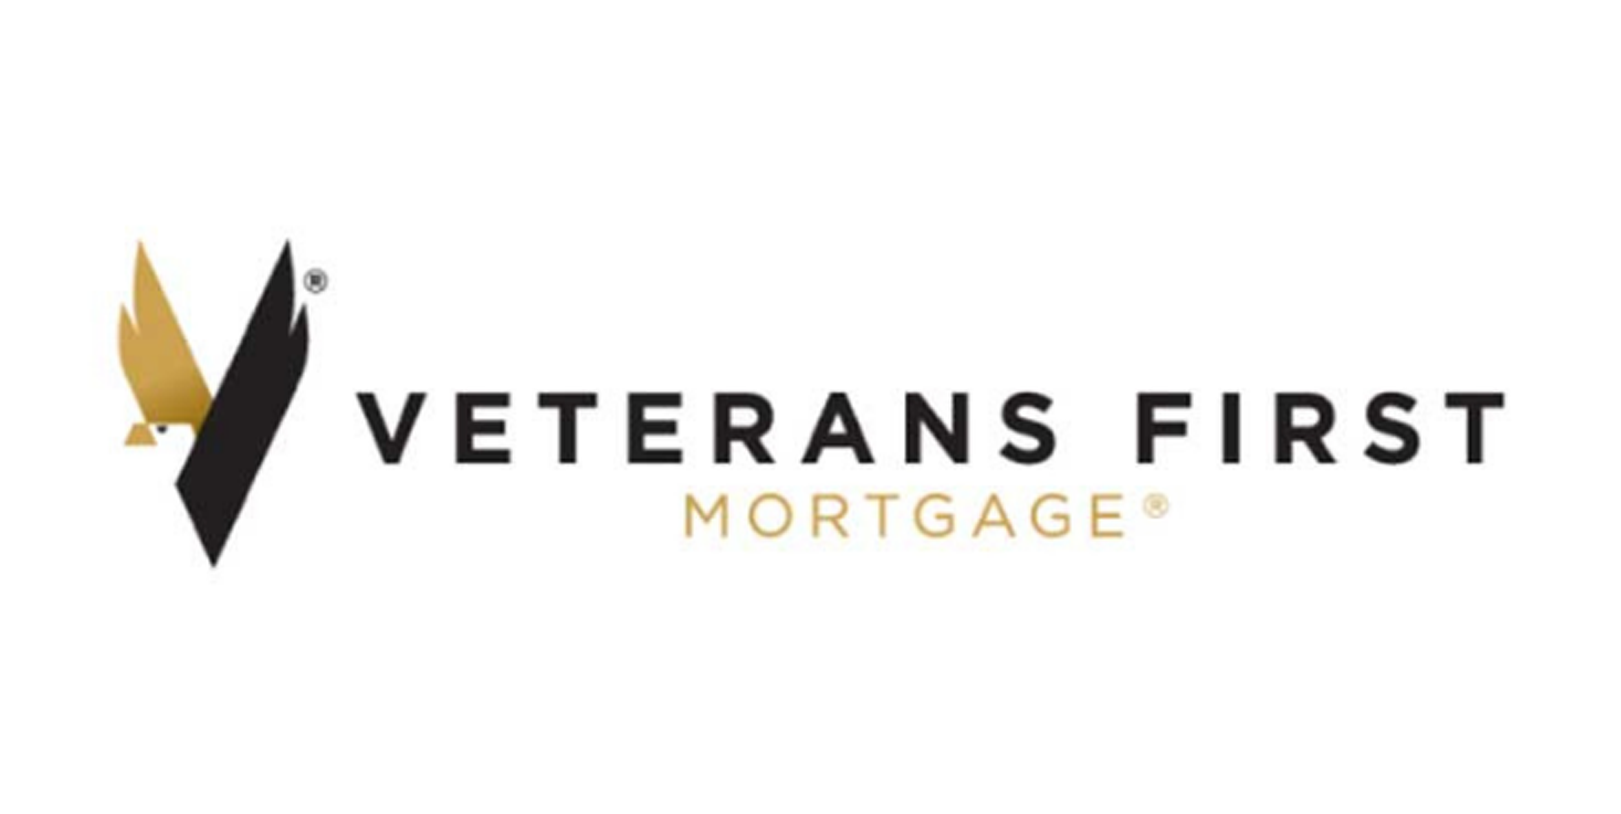 The Malinois Foundation - Trusted Utah First Responders Veterans First Mortgage